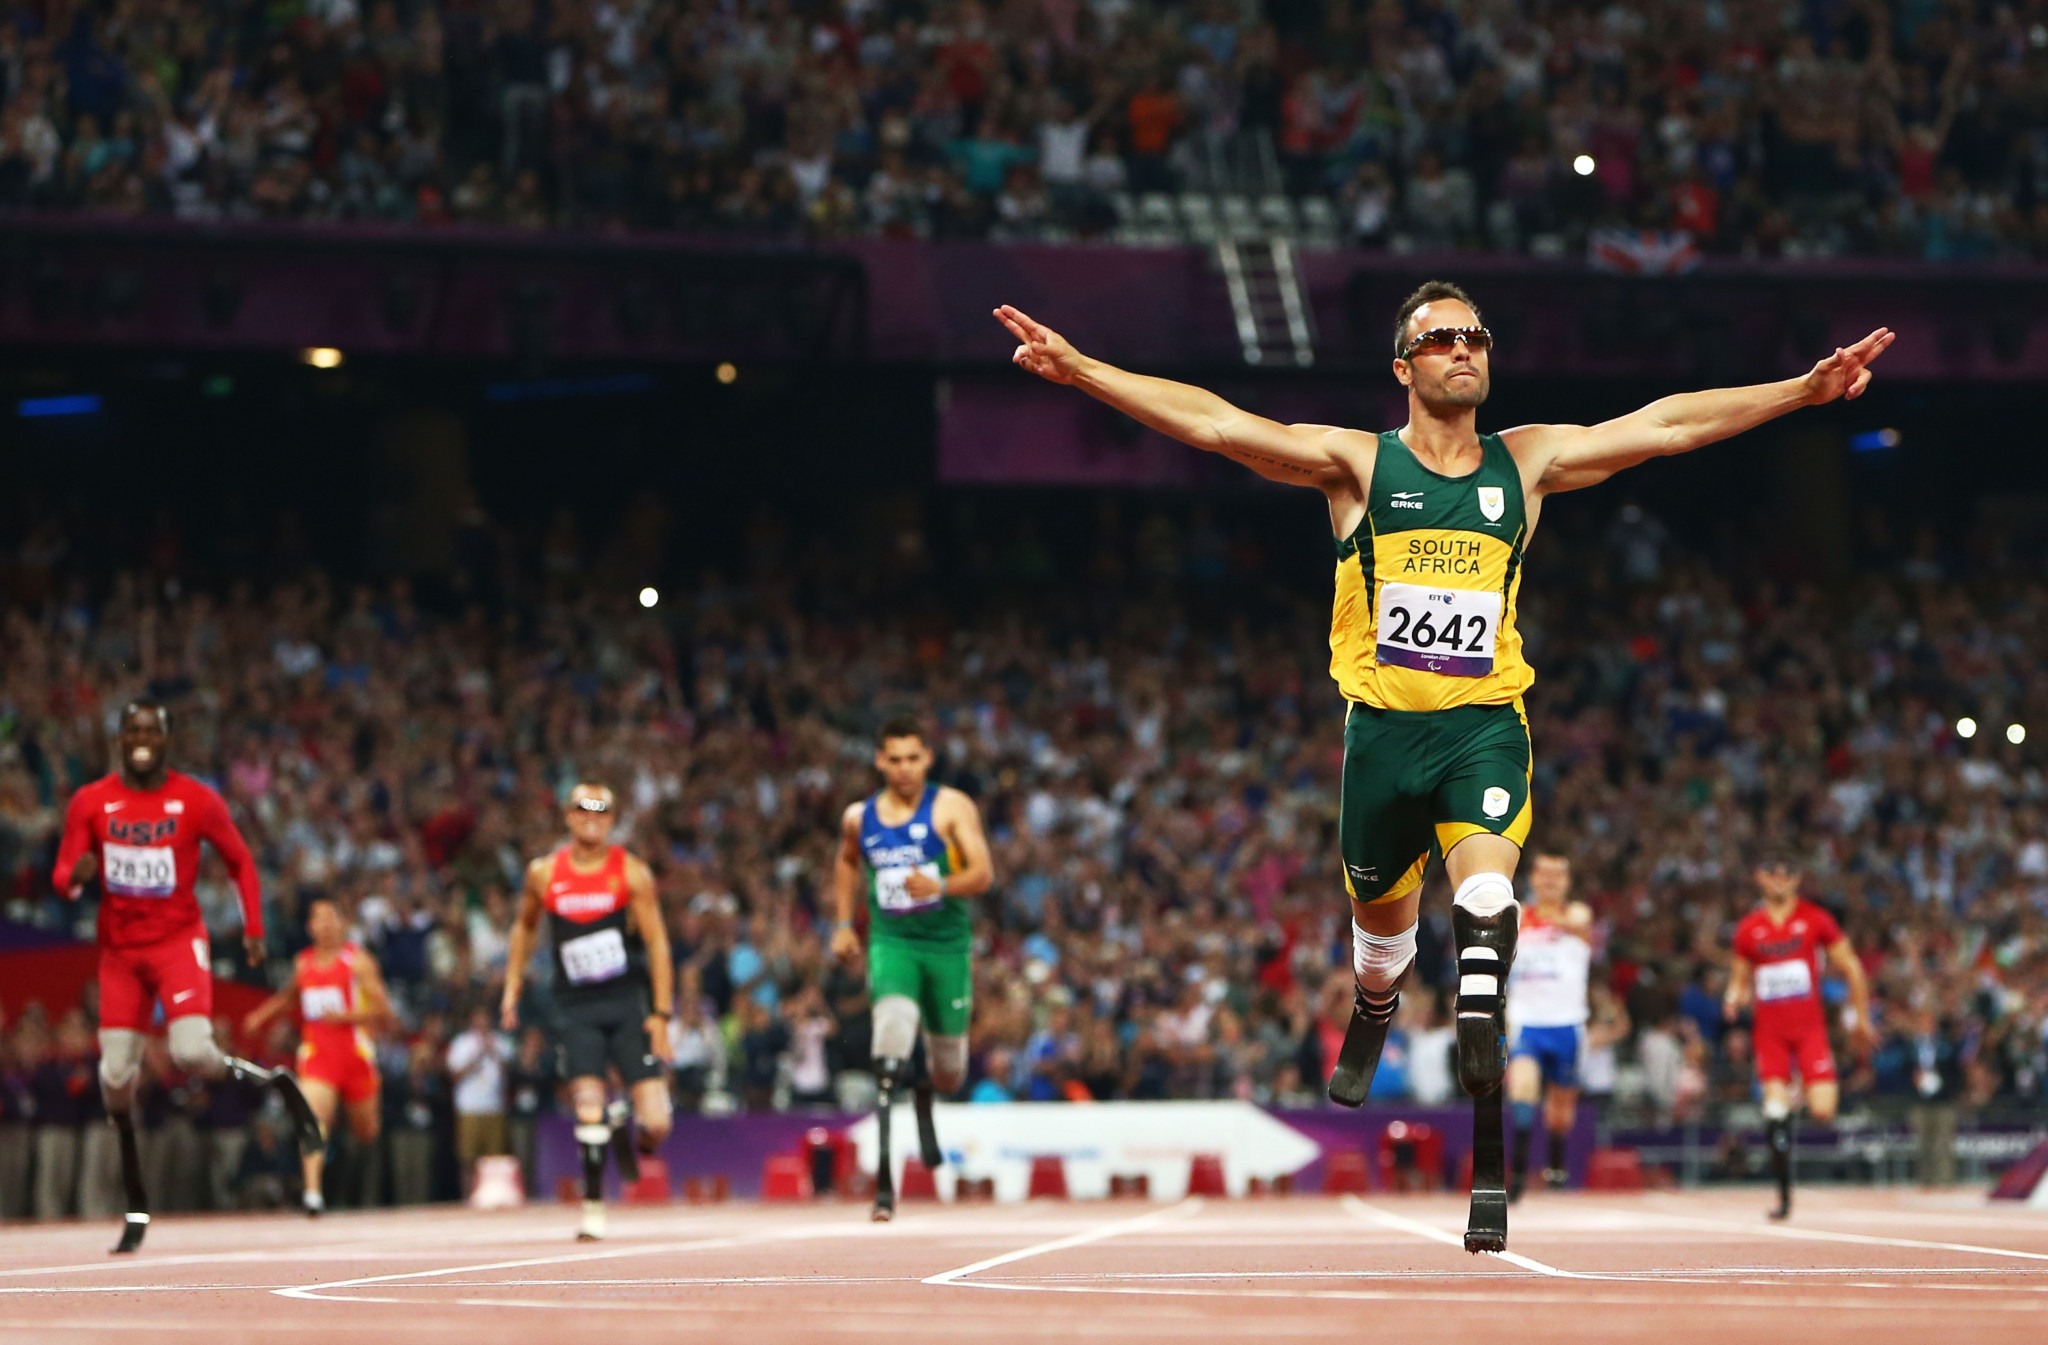 Are we set to witness a new breakout Paralympian at Paris 2024 since Pistorius? GETTY IMAGES